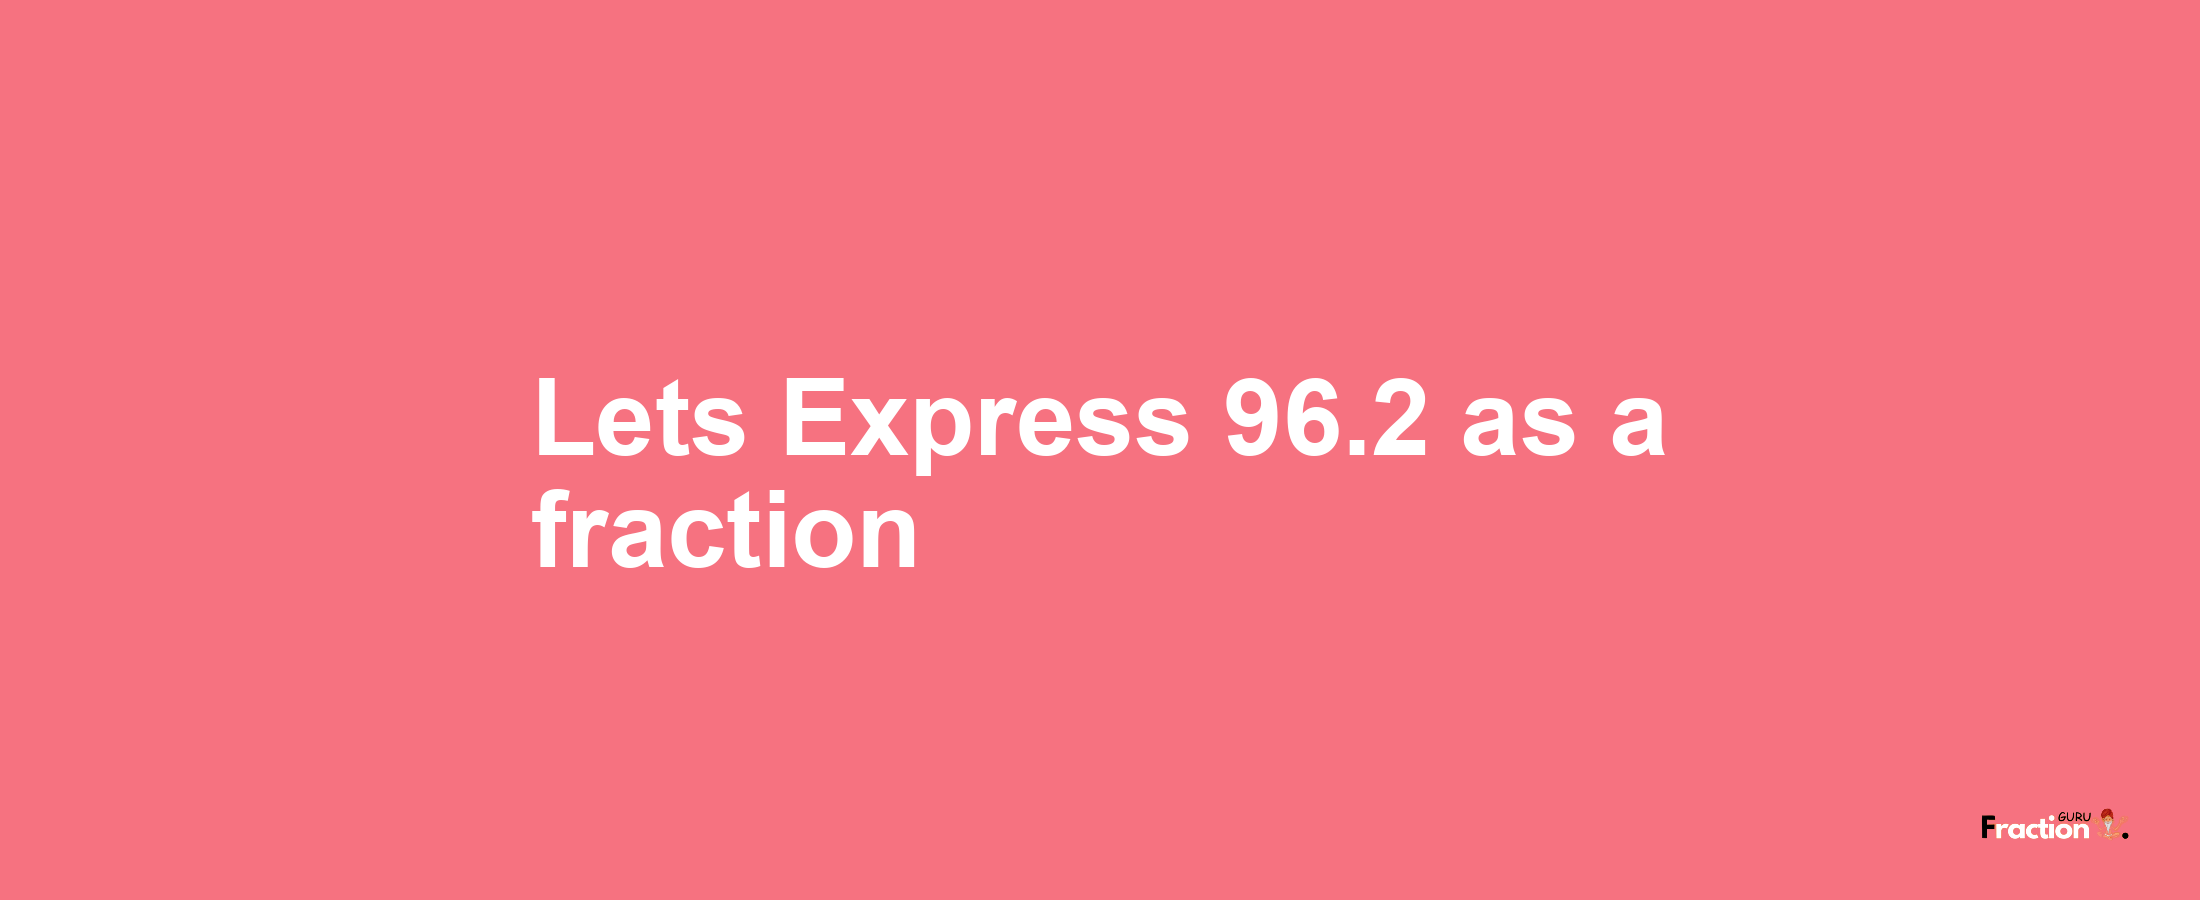 Lets Express 96.2 as afraction